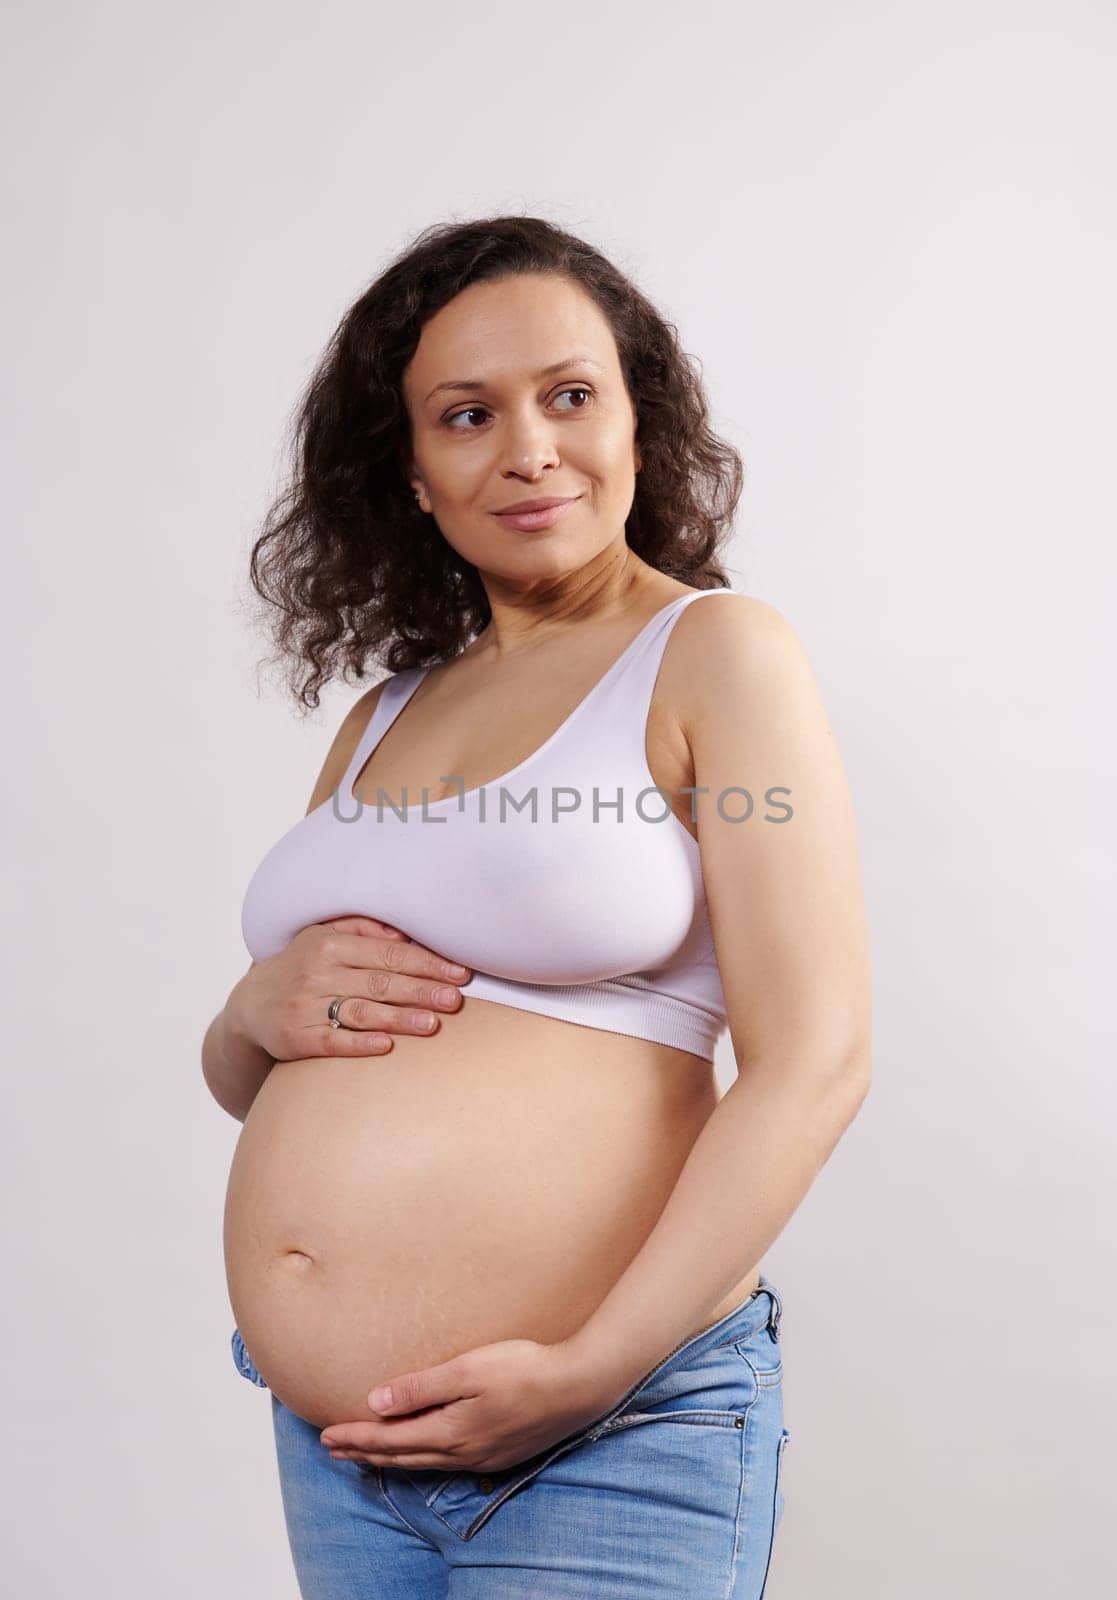 Confident delightful Latin American gravid young woman 35-39 years old, smiling cutely looking aside, caressing her pregnant belly, enjoying happy and carefree pregnancy, isolated on white background